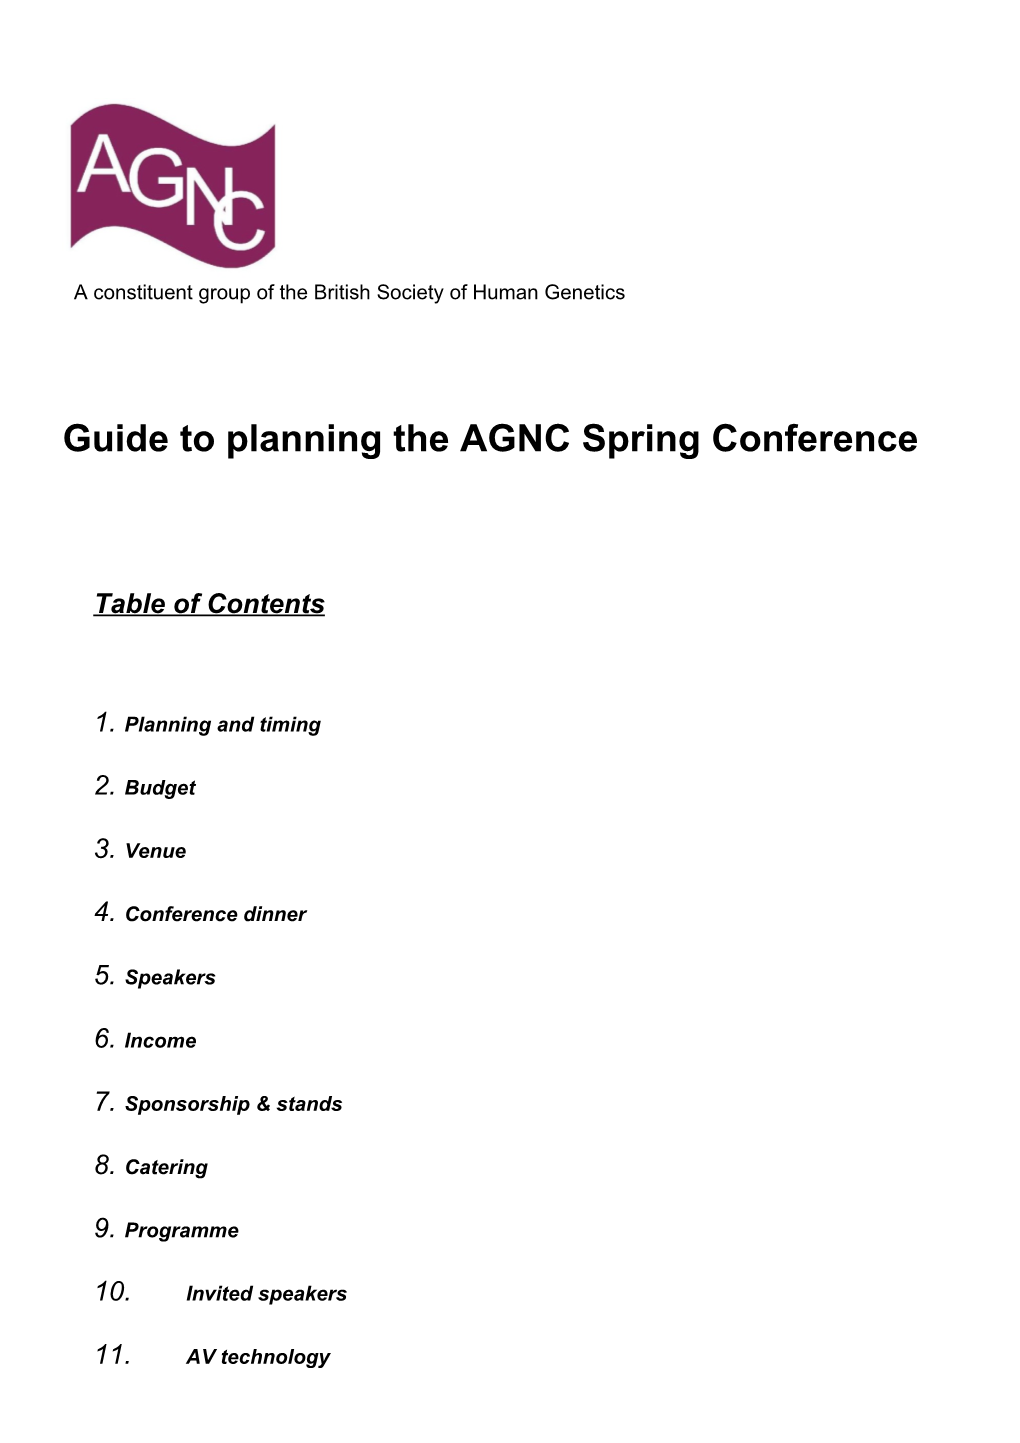 Guide to Planning the AGNC Spring Conference